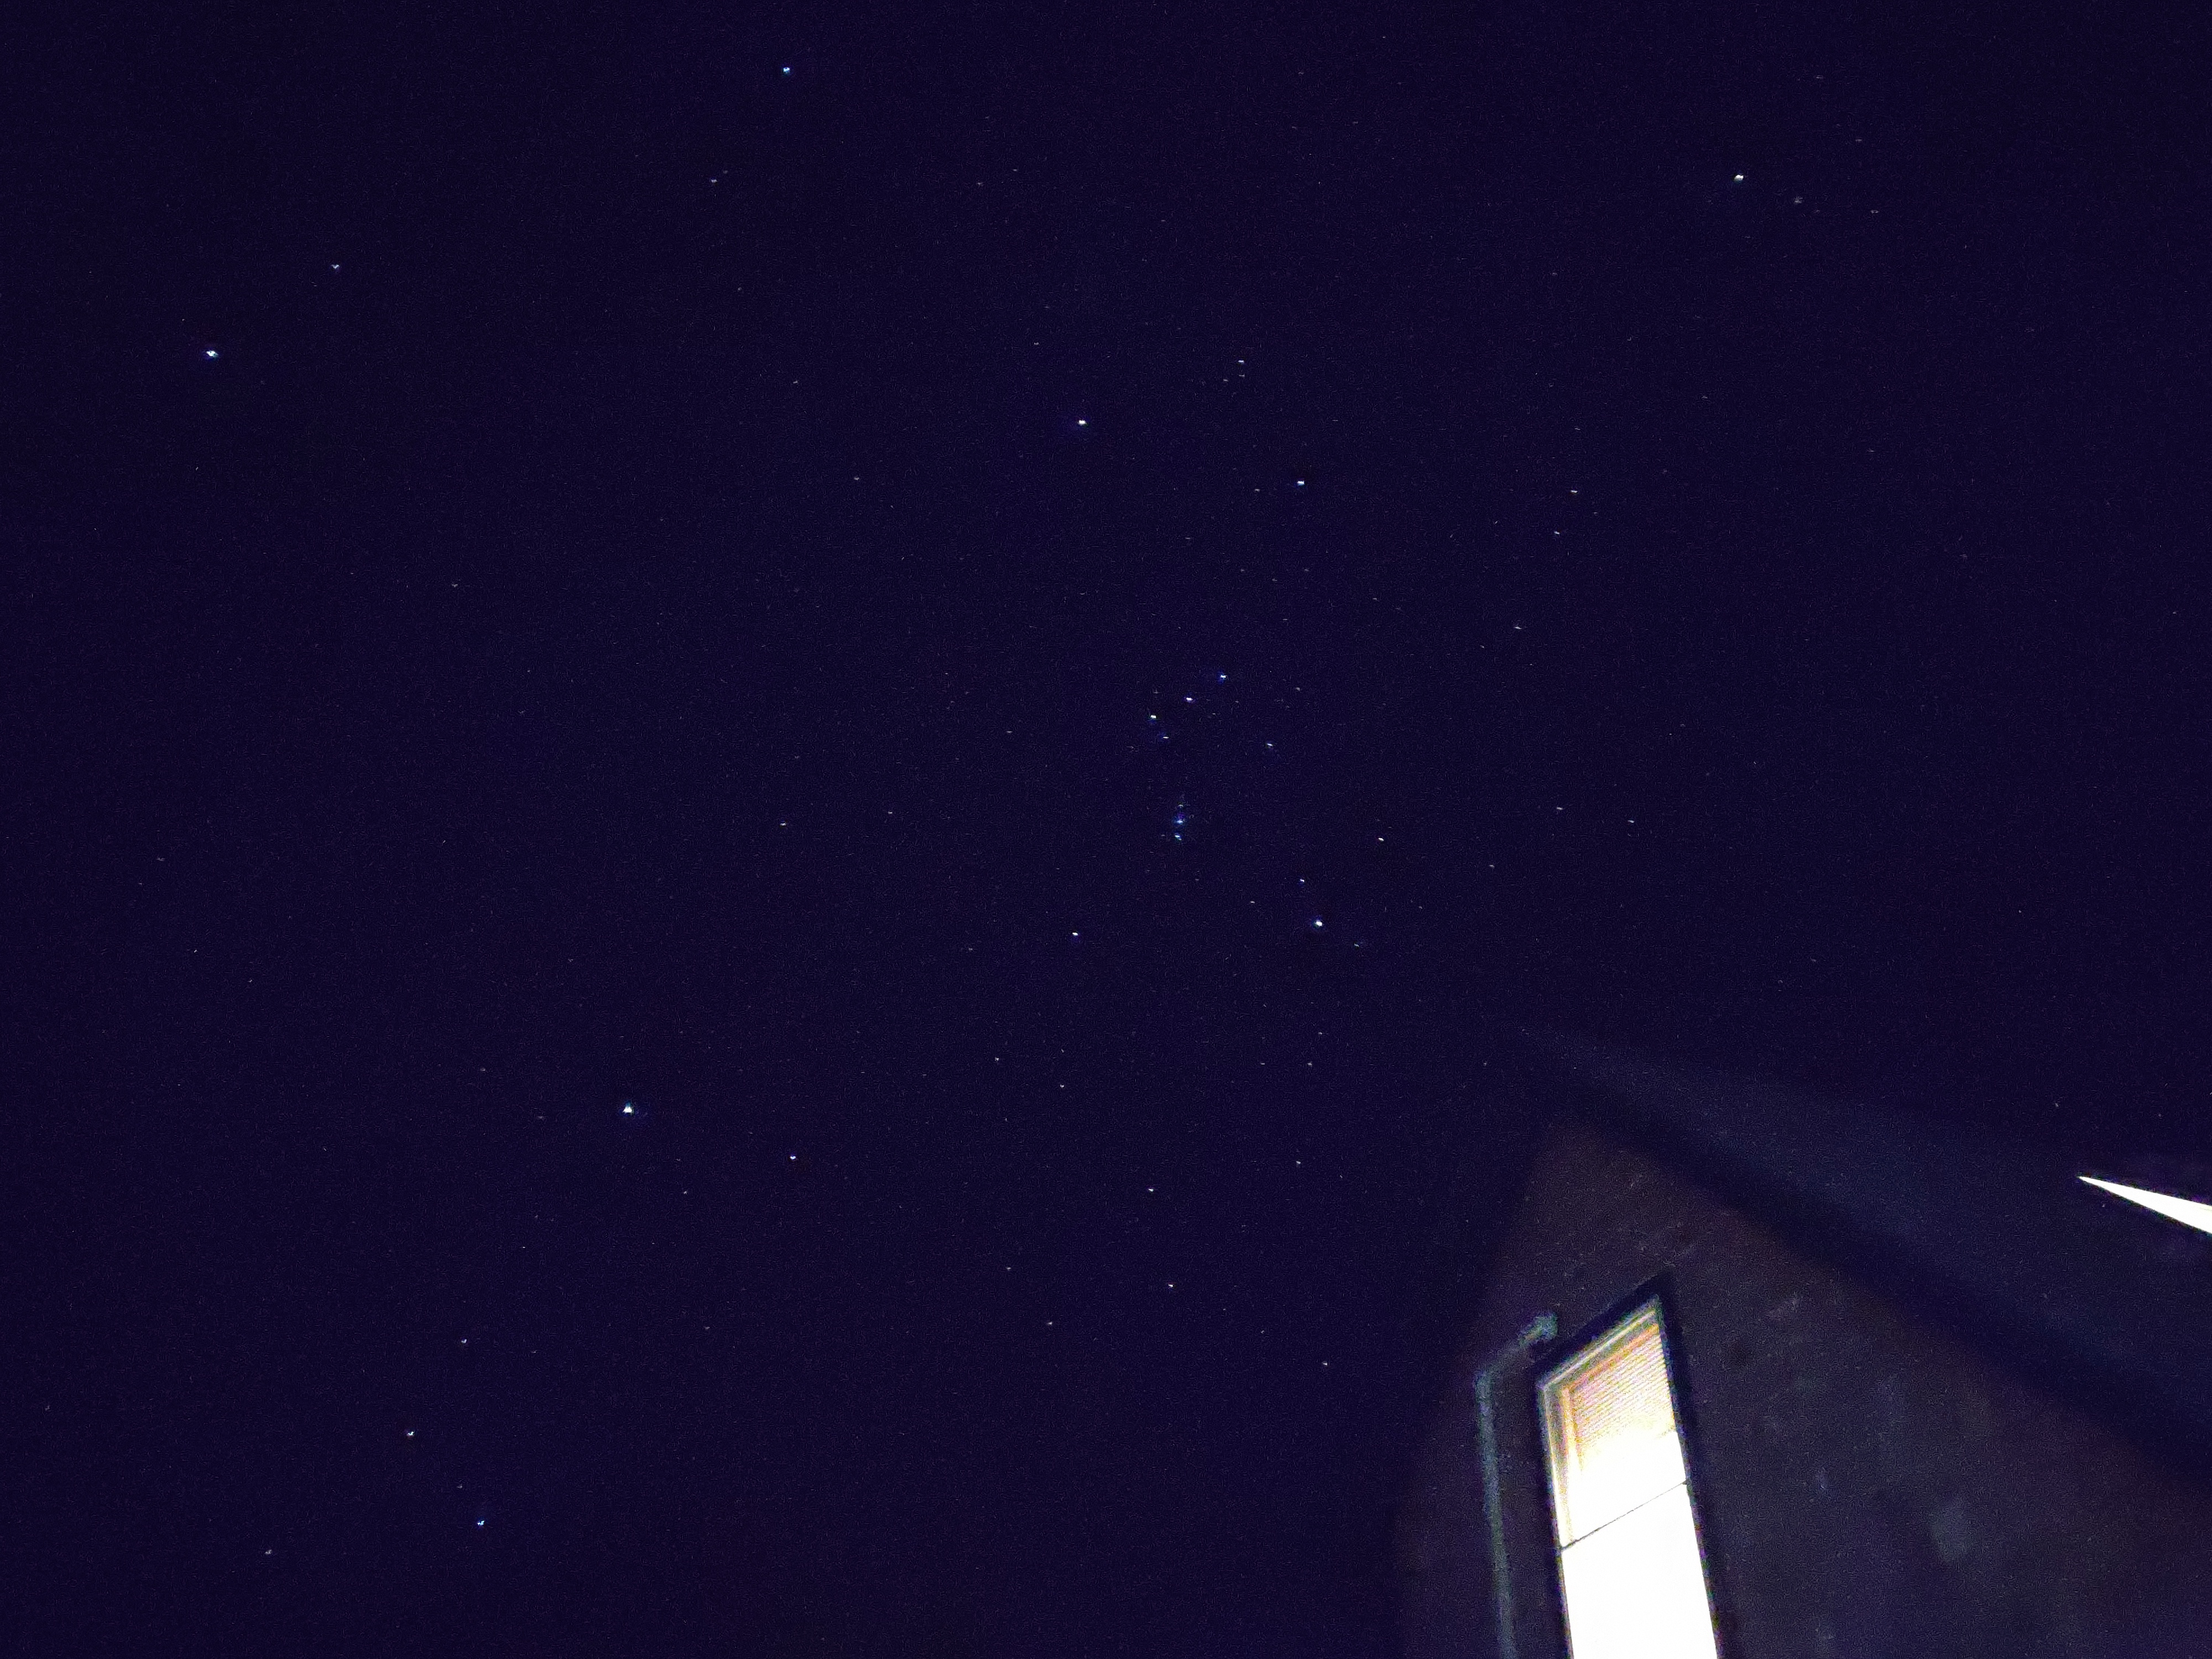 The stars in Linconlville, ME.